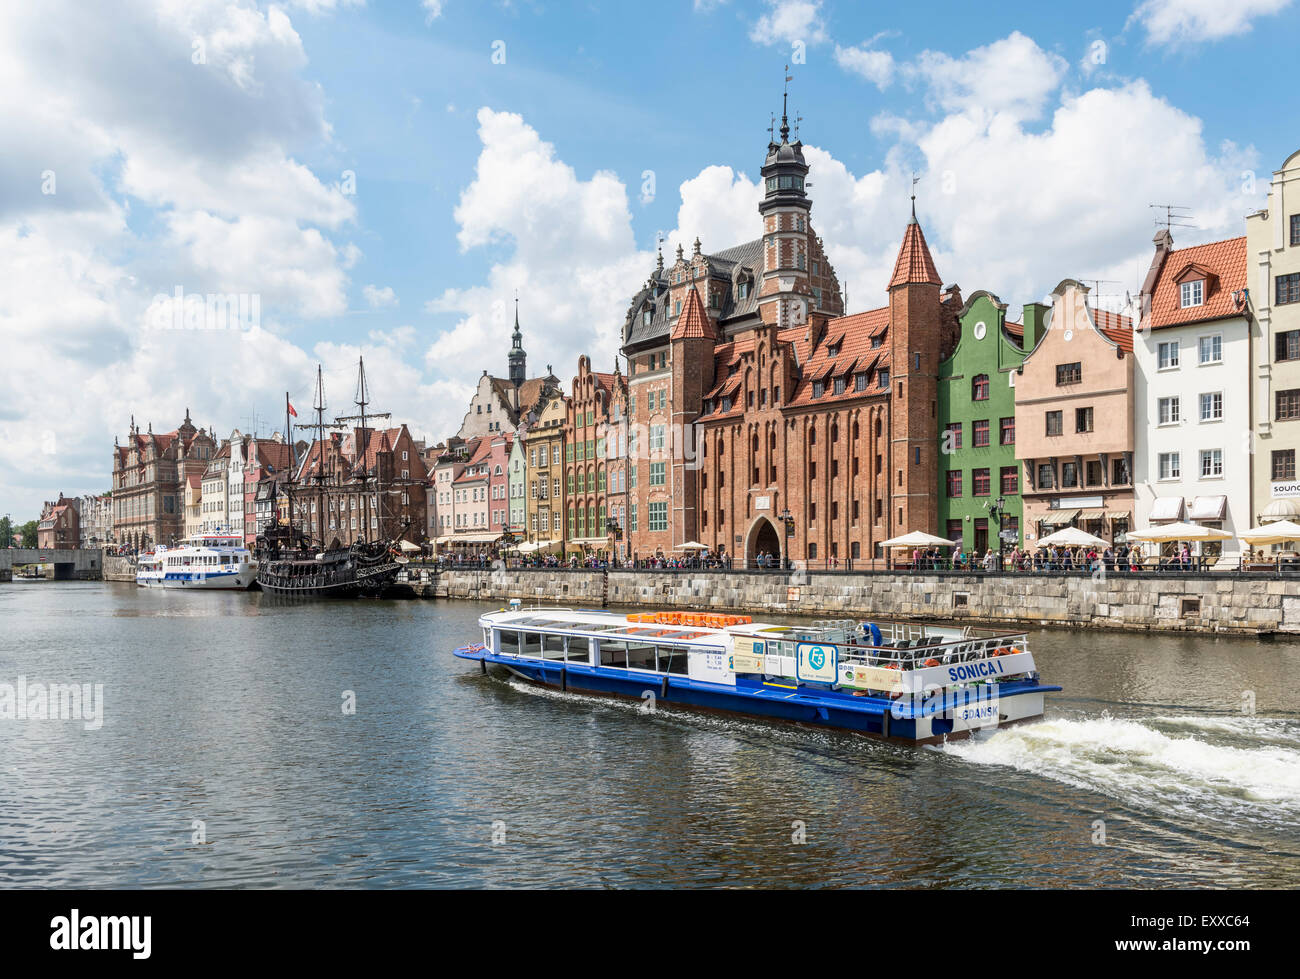 Tourist tour boat in Gdansk, Poland, Europe on the banks of the River Motlawa. Stock Photo